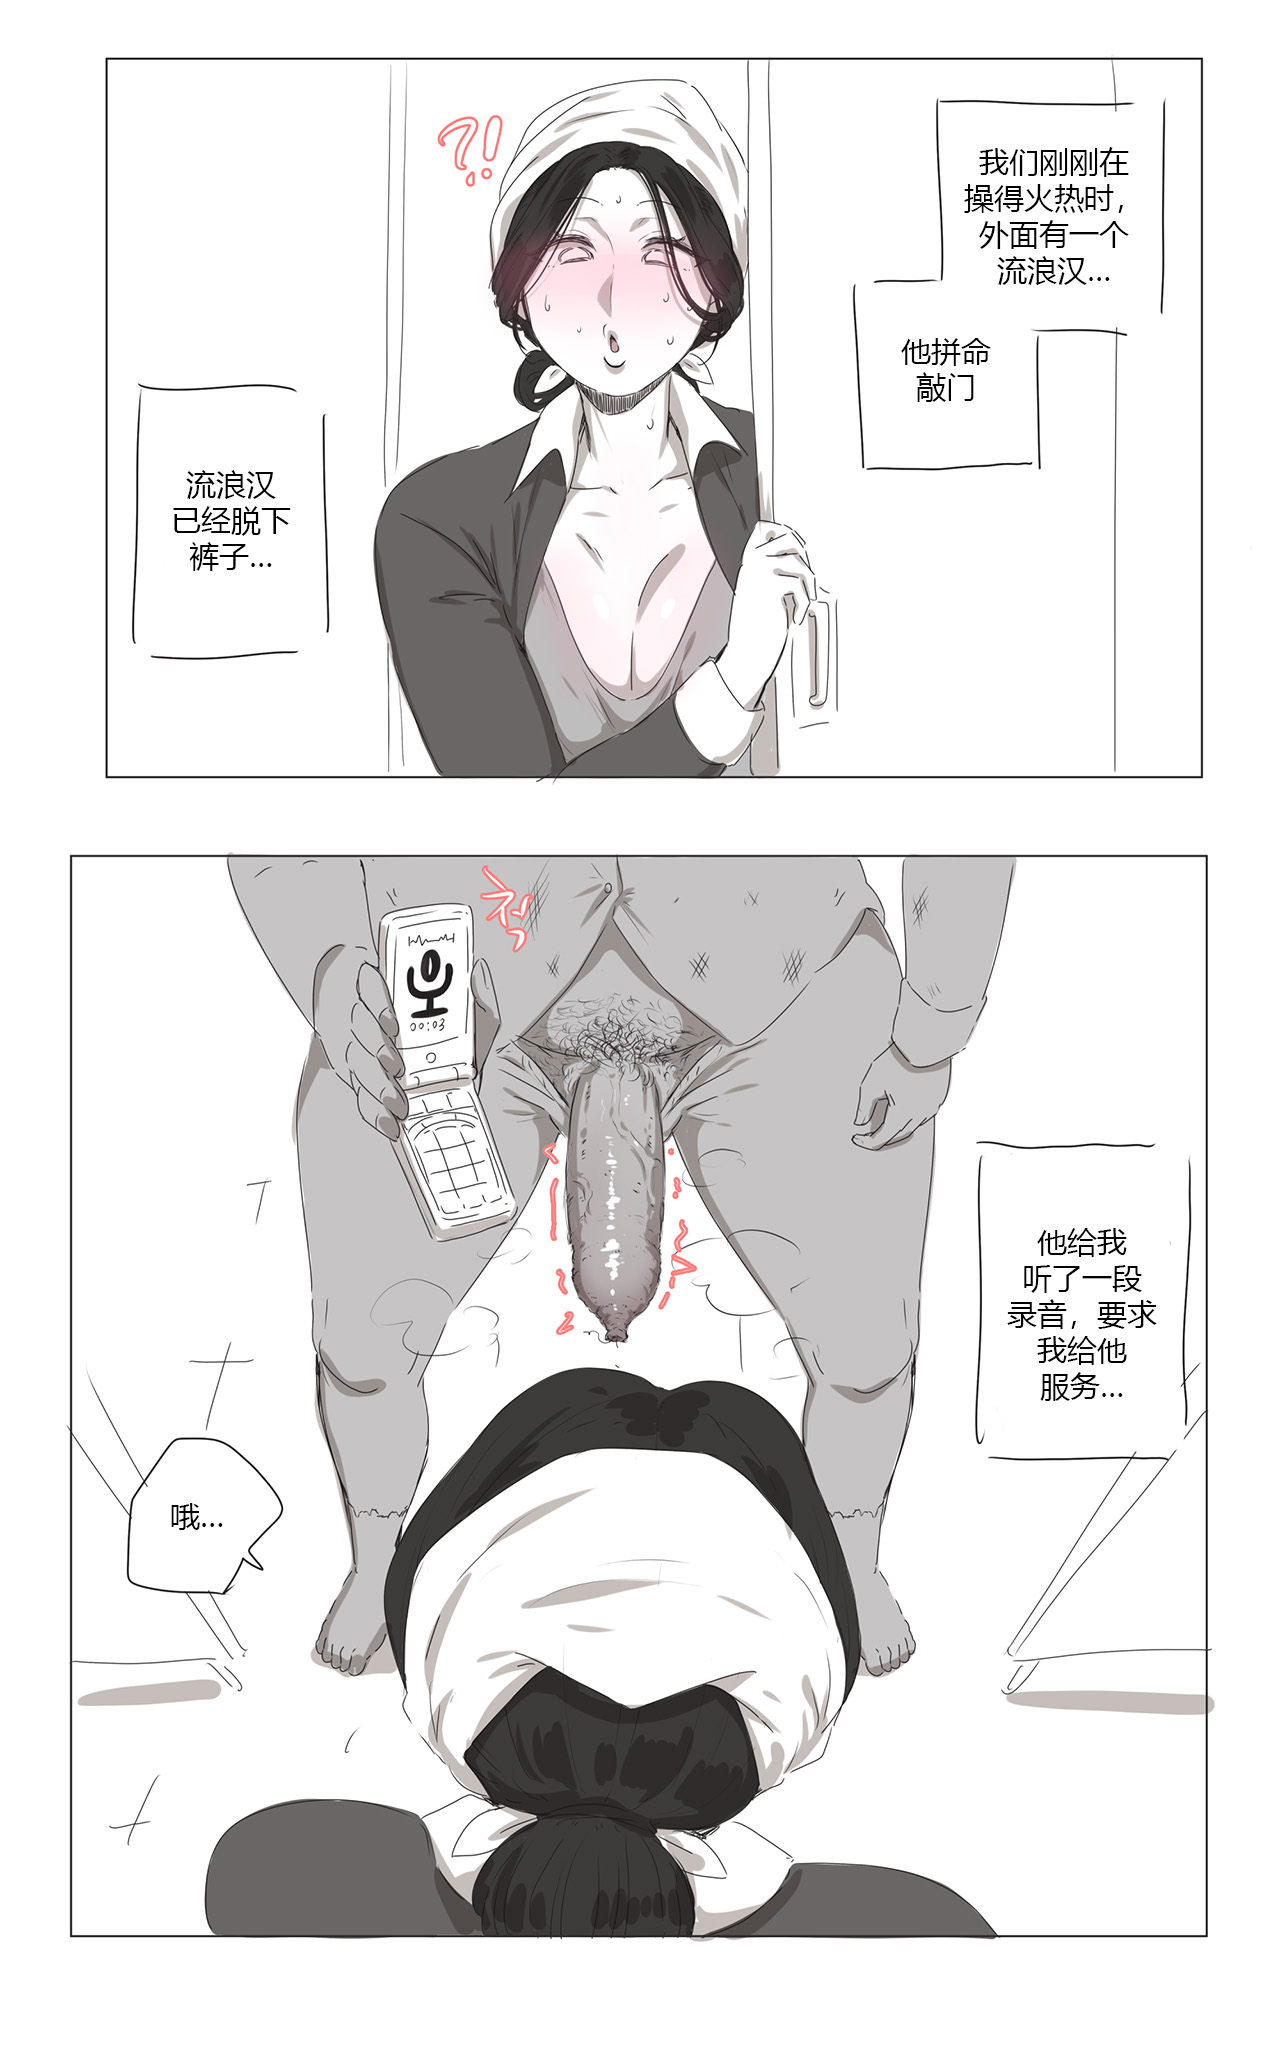 [Ooyun]The Cleaning Lady